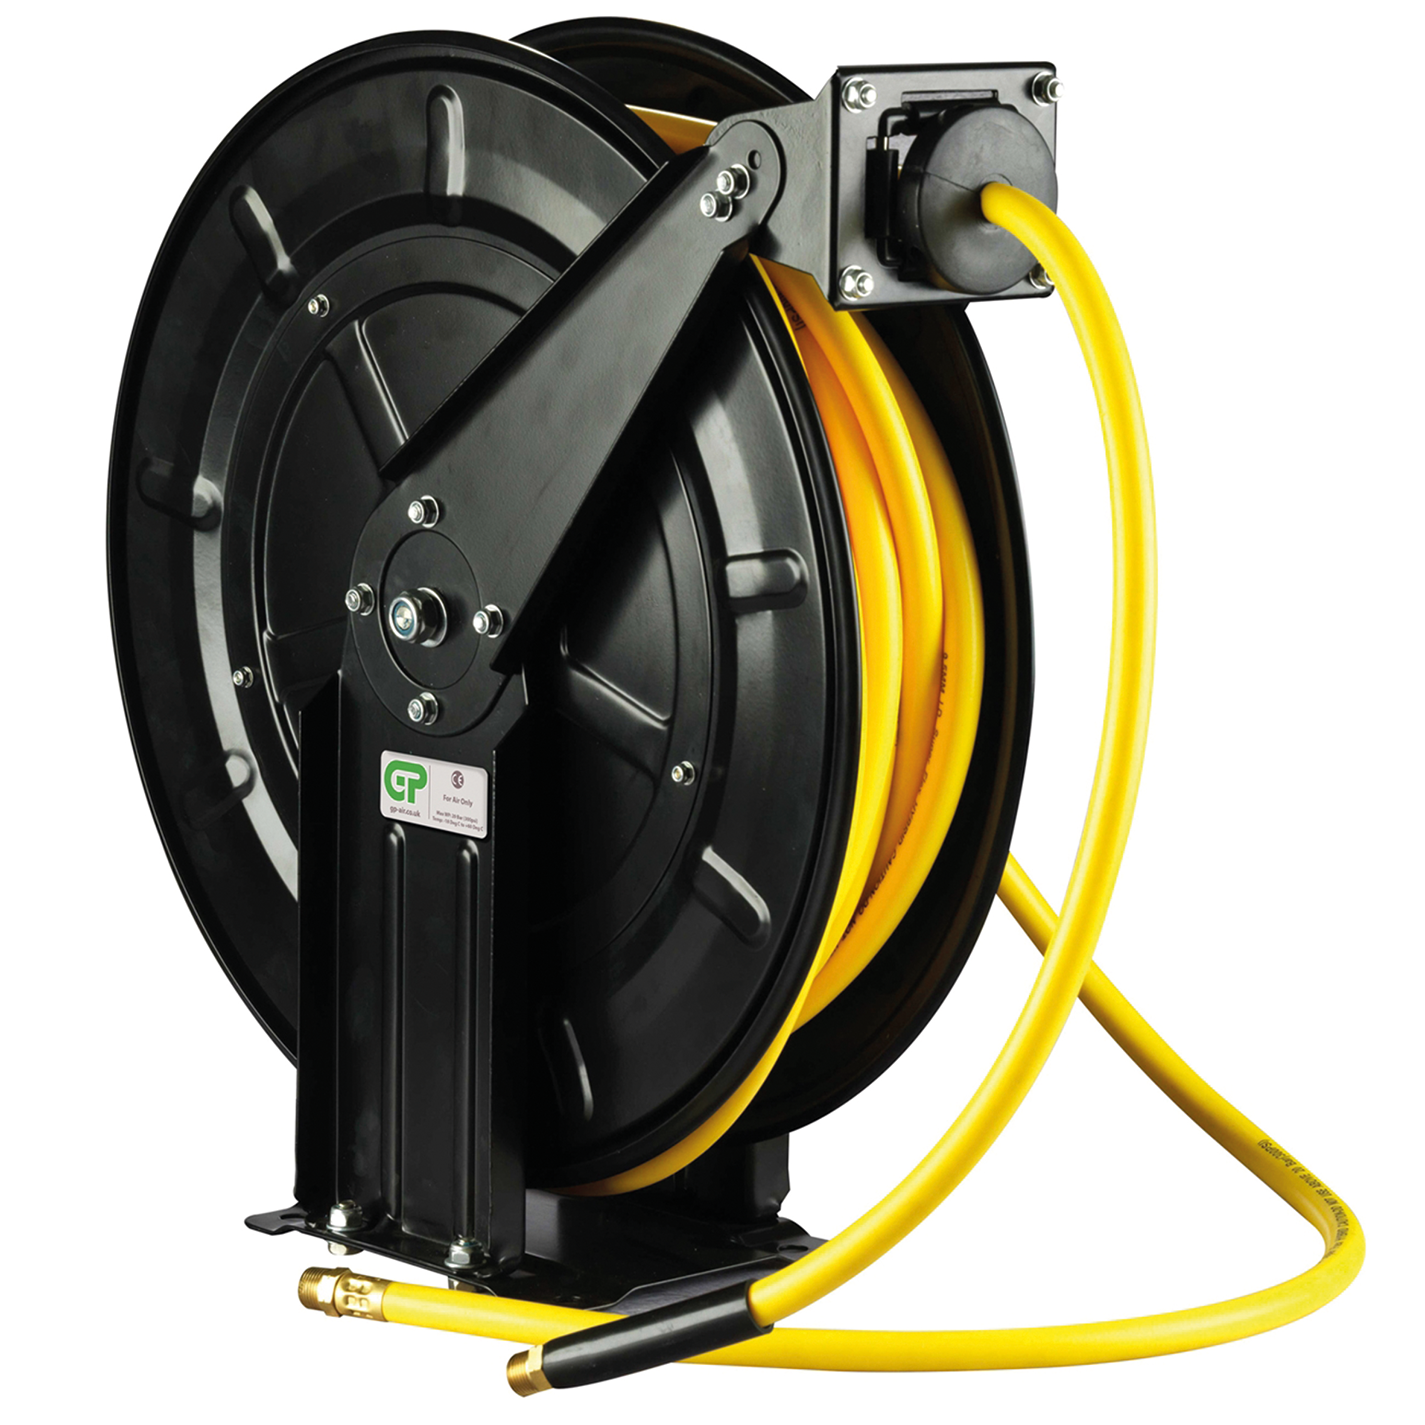 Havy Duty Air Hose Reel comes with Hose